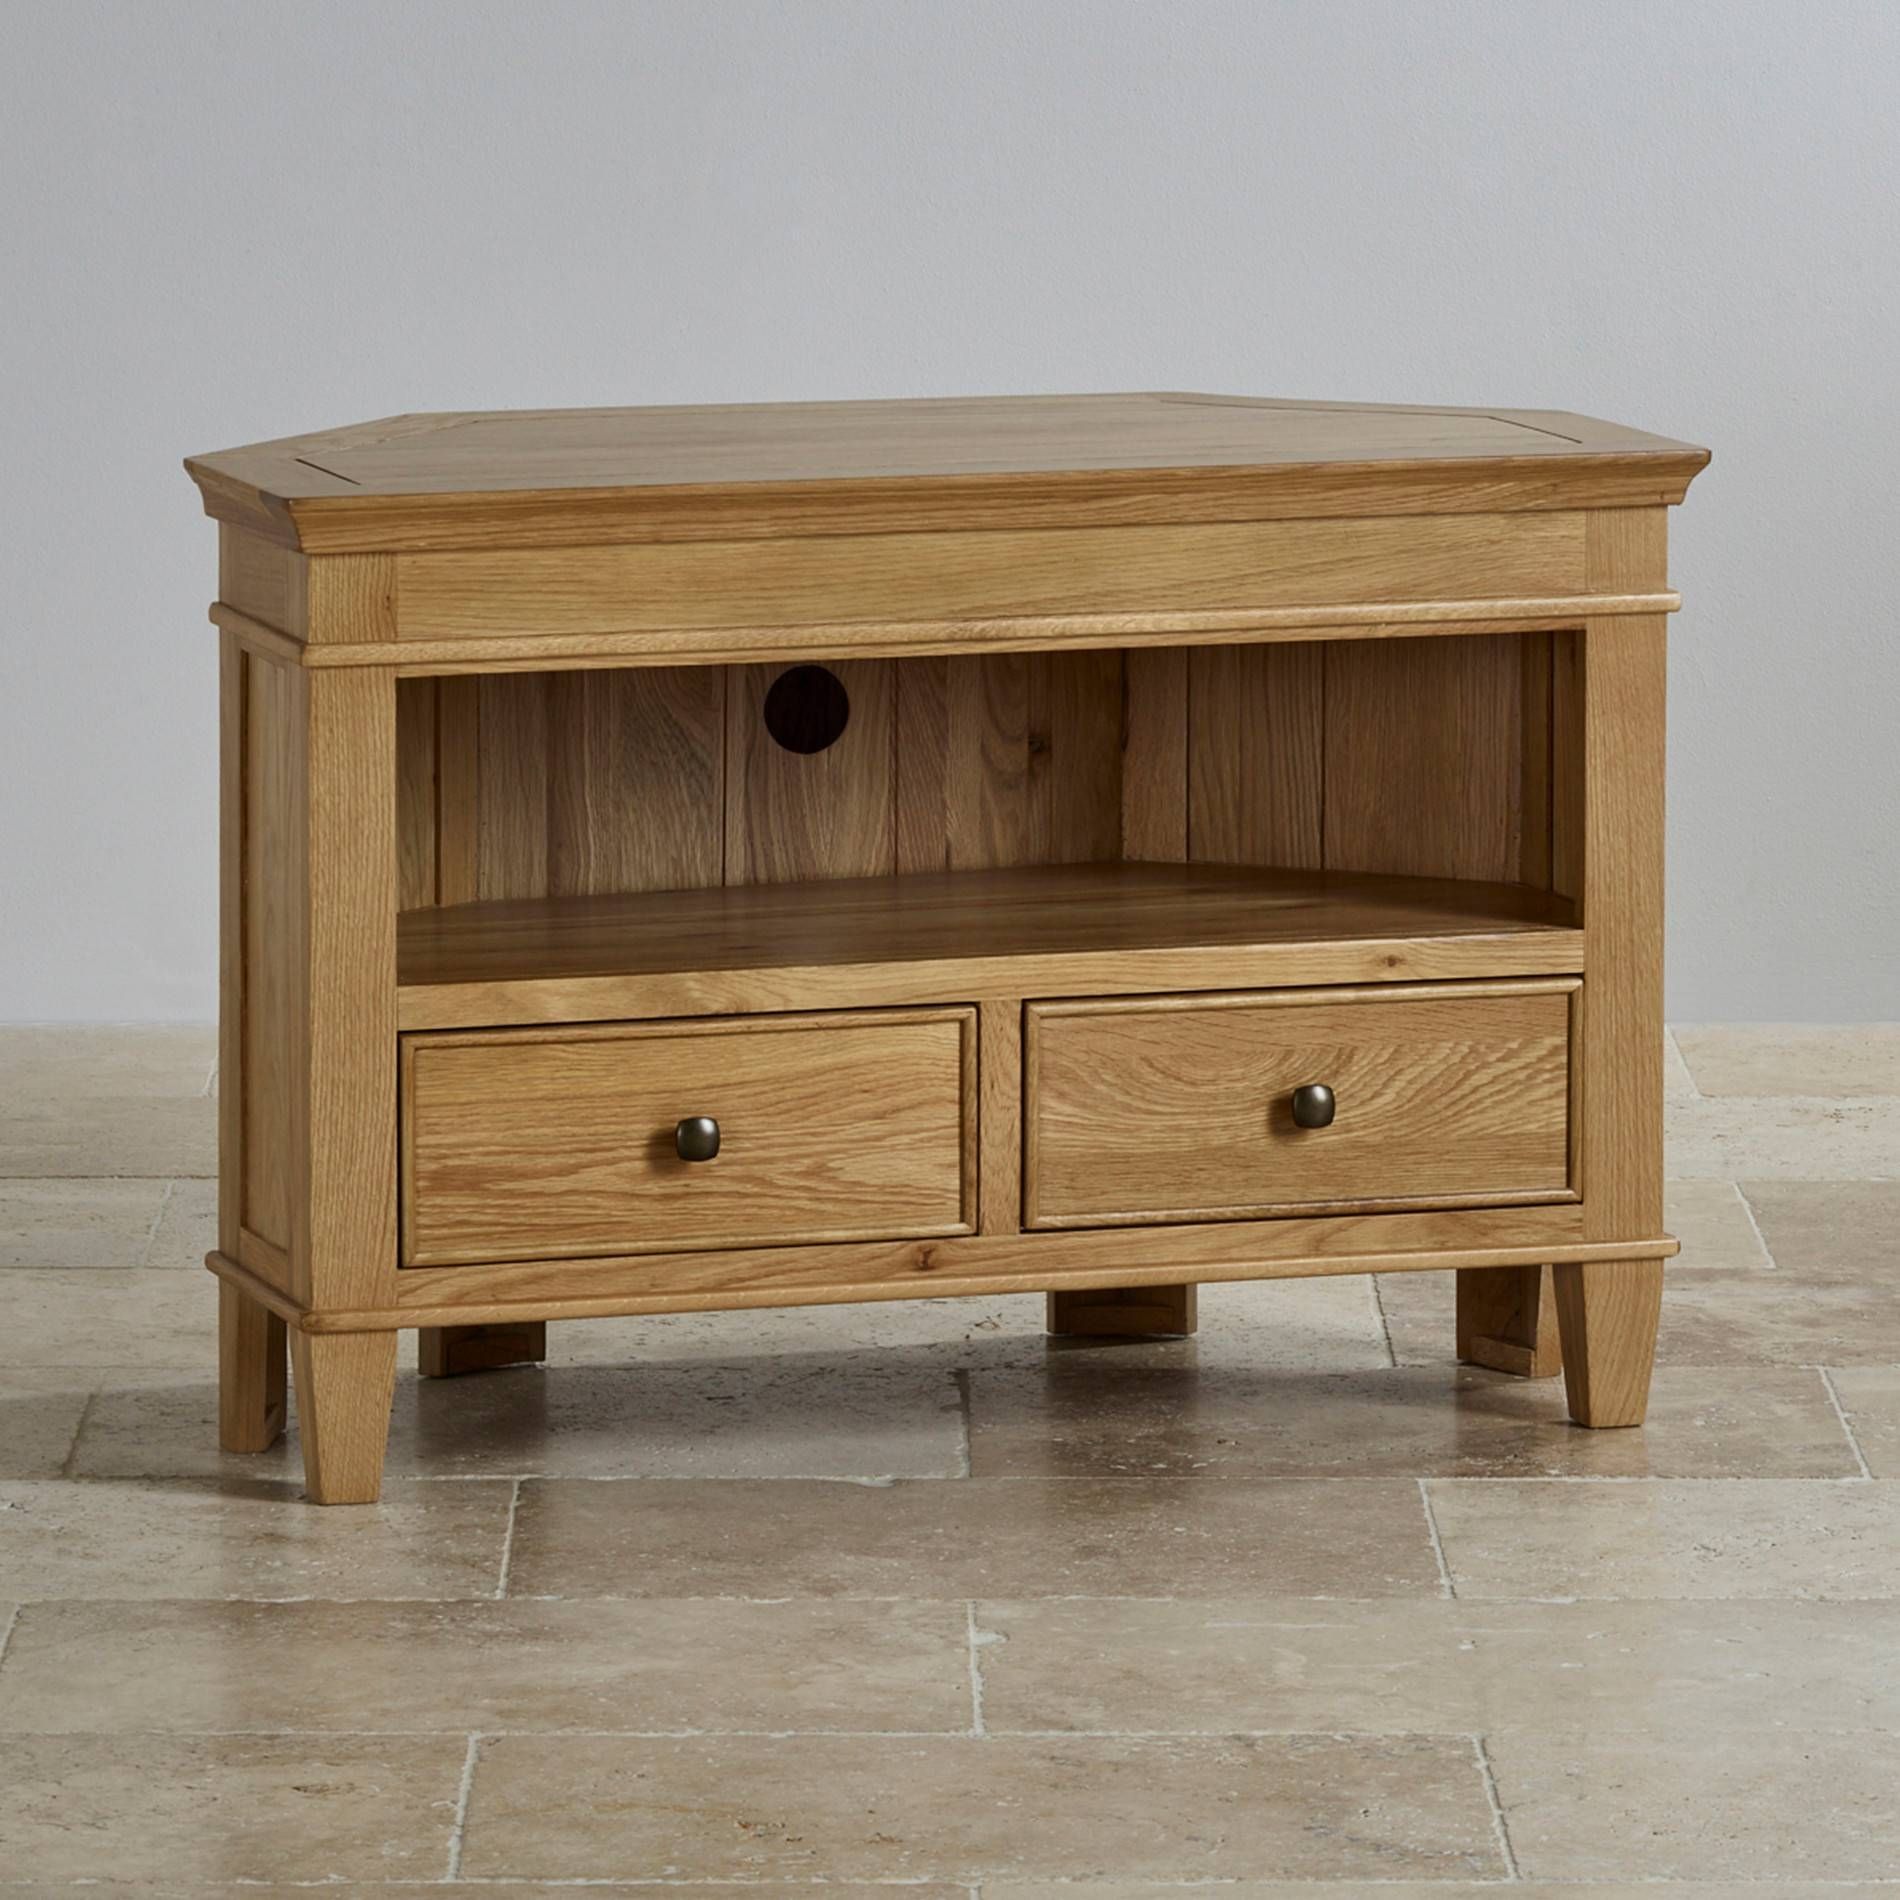 Classic Corner Tv Cabinet In Solid Oak | Oak Furniture Land Pertaining To Solid Wood Corner Tv Cabinets (View 5 of 15)